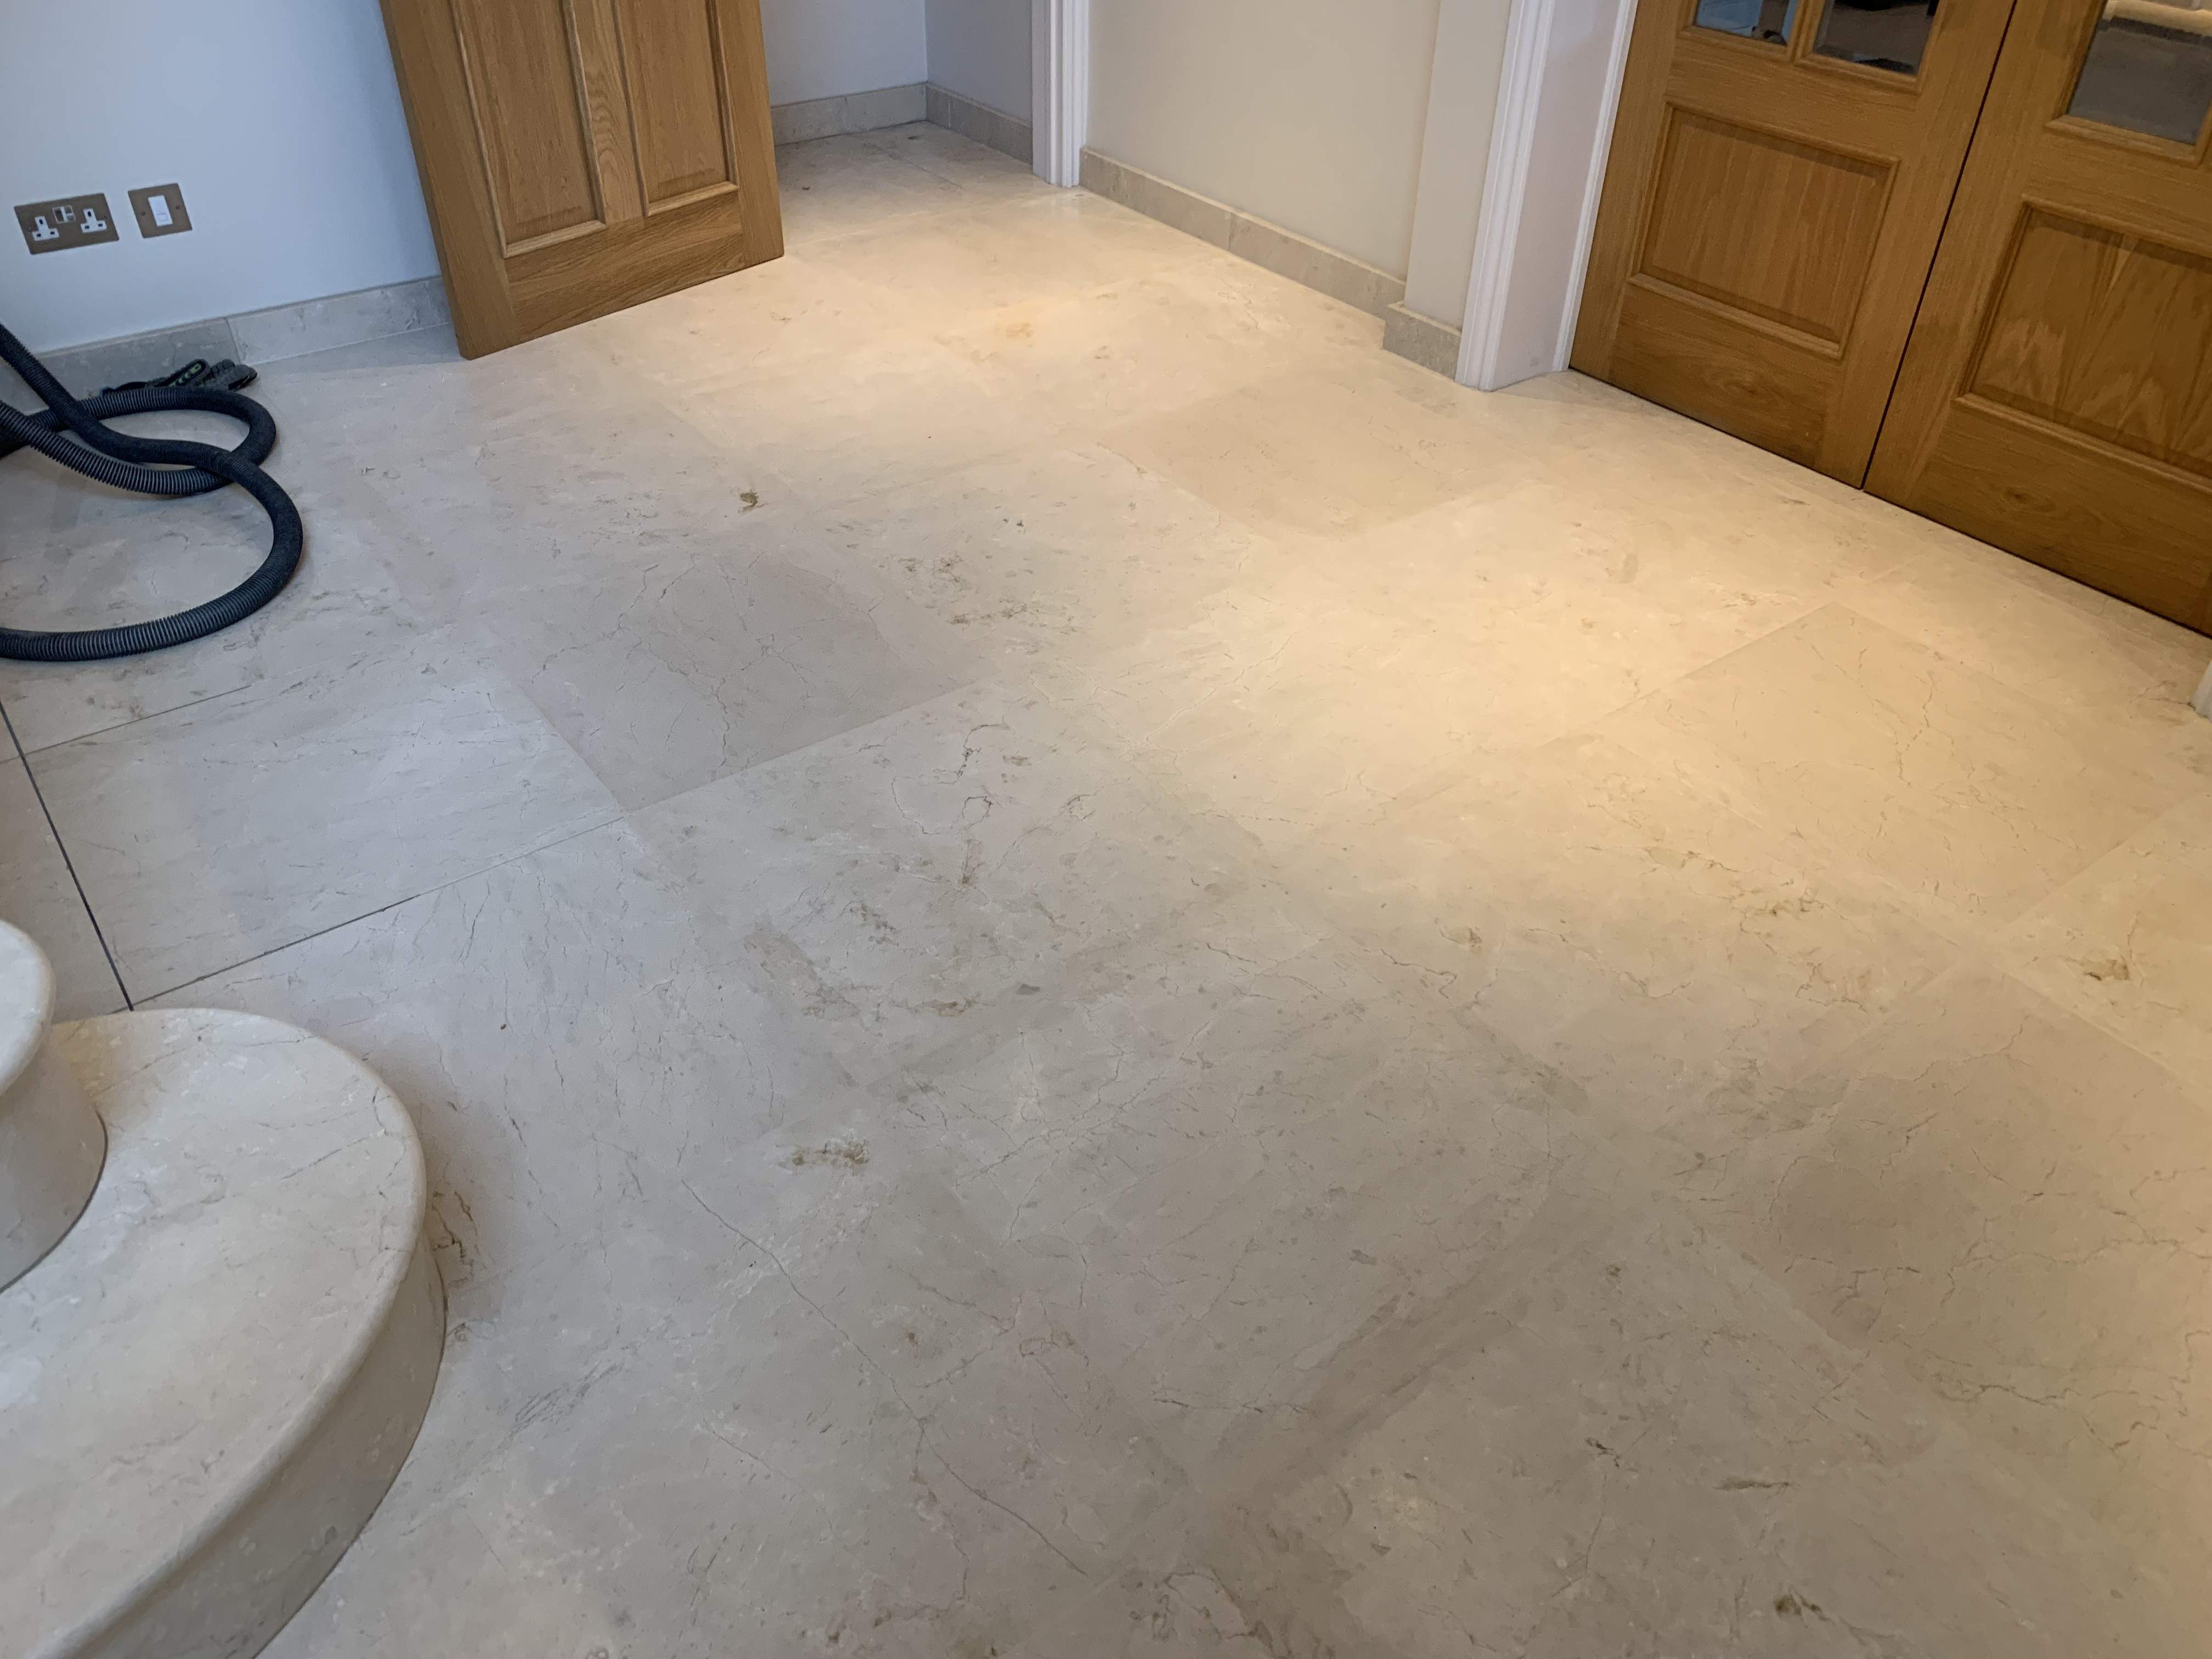 Marble floor re-grouting using epoxy resin